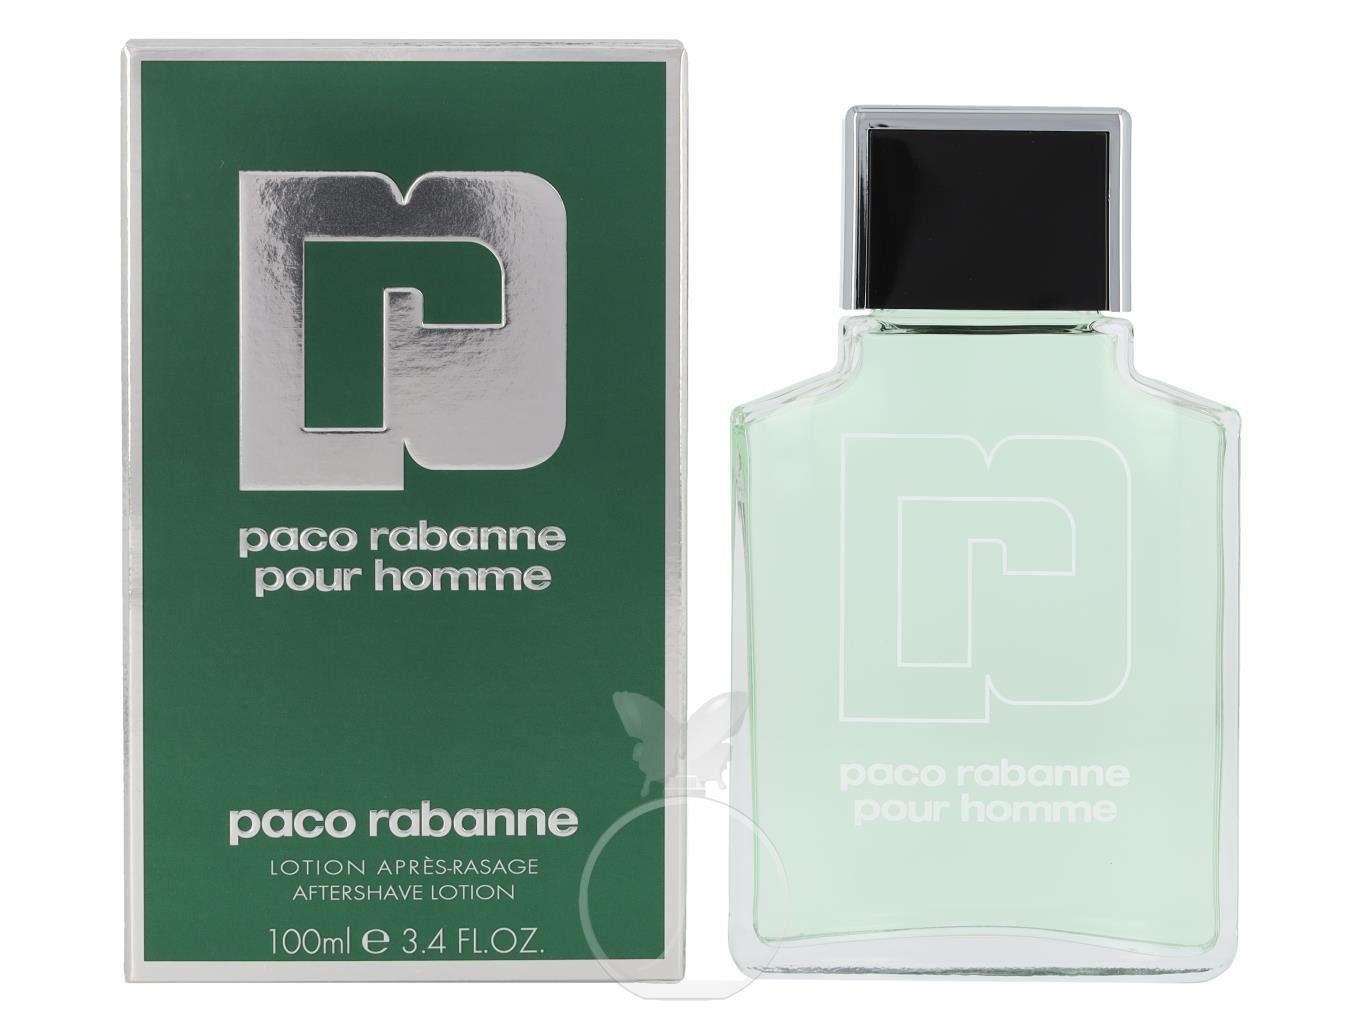 rabanne homme Lotion ml After After Shave Packung pour 100 rabanne paco Shave paco